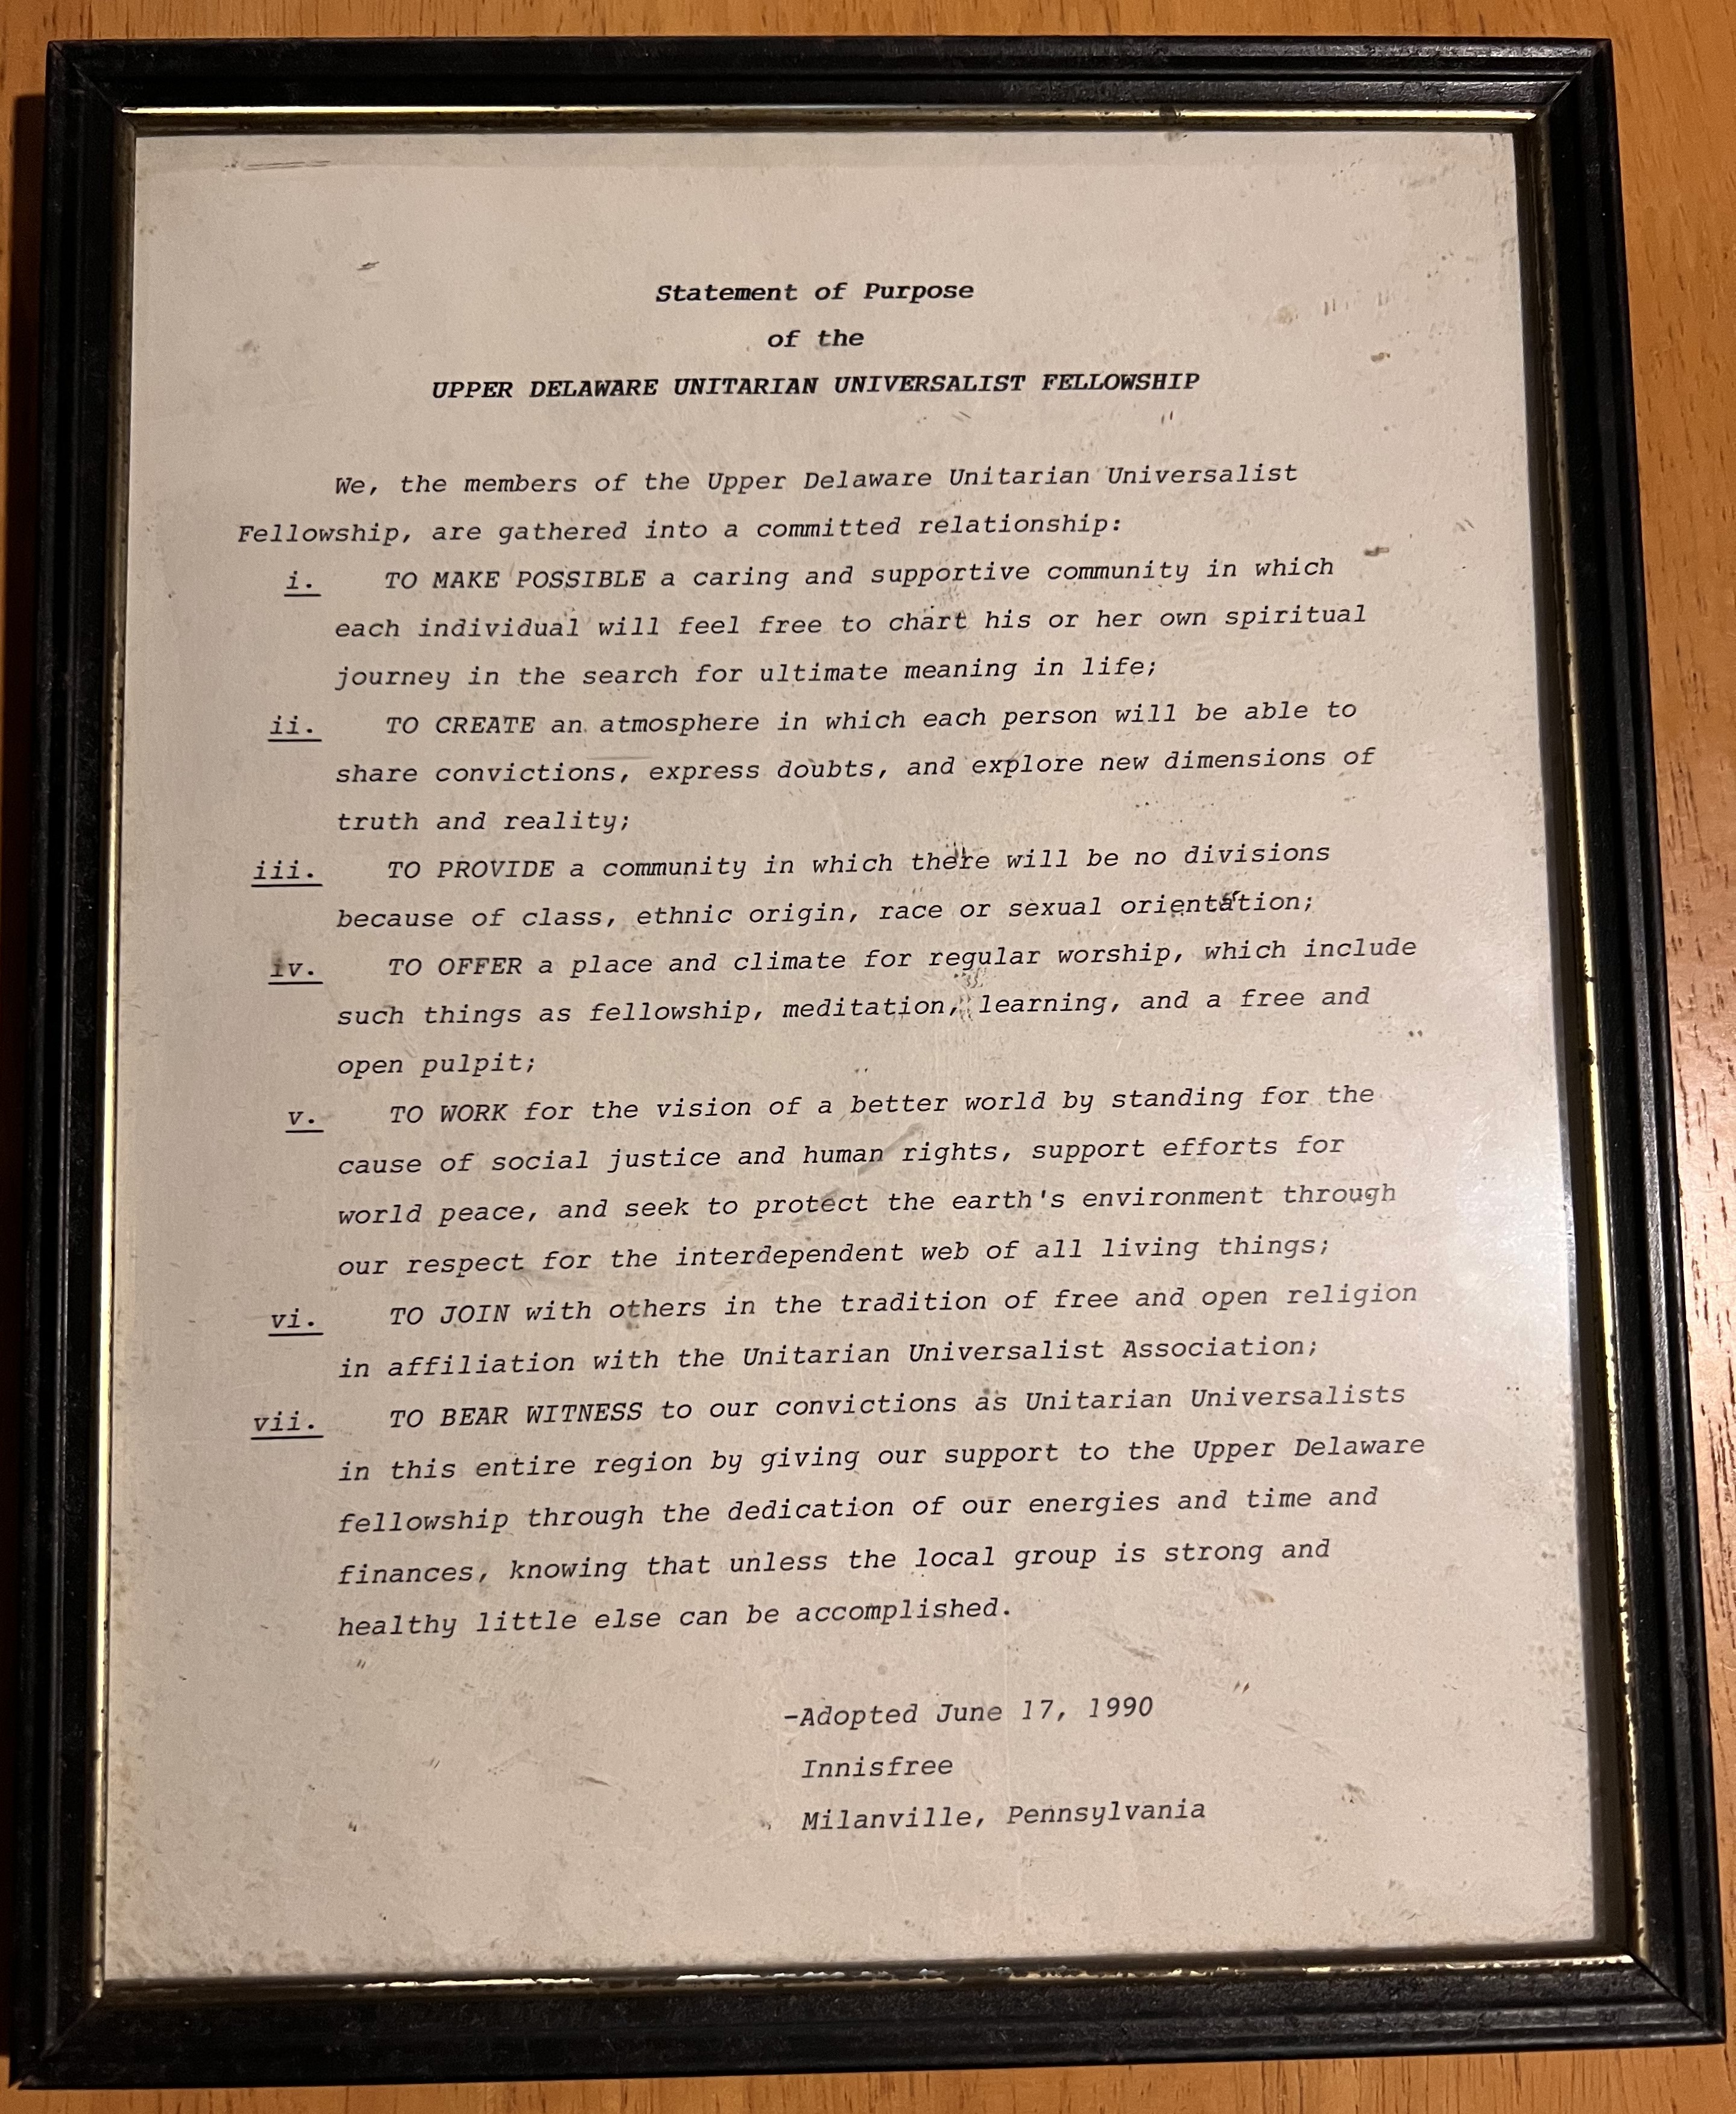 Statement of Purpose of the UDUUF adopted 6/17/1990 at Innisfree in Milanville, Pennsylvania